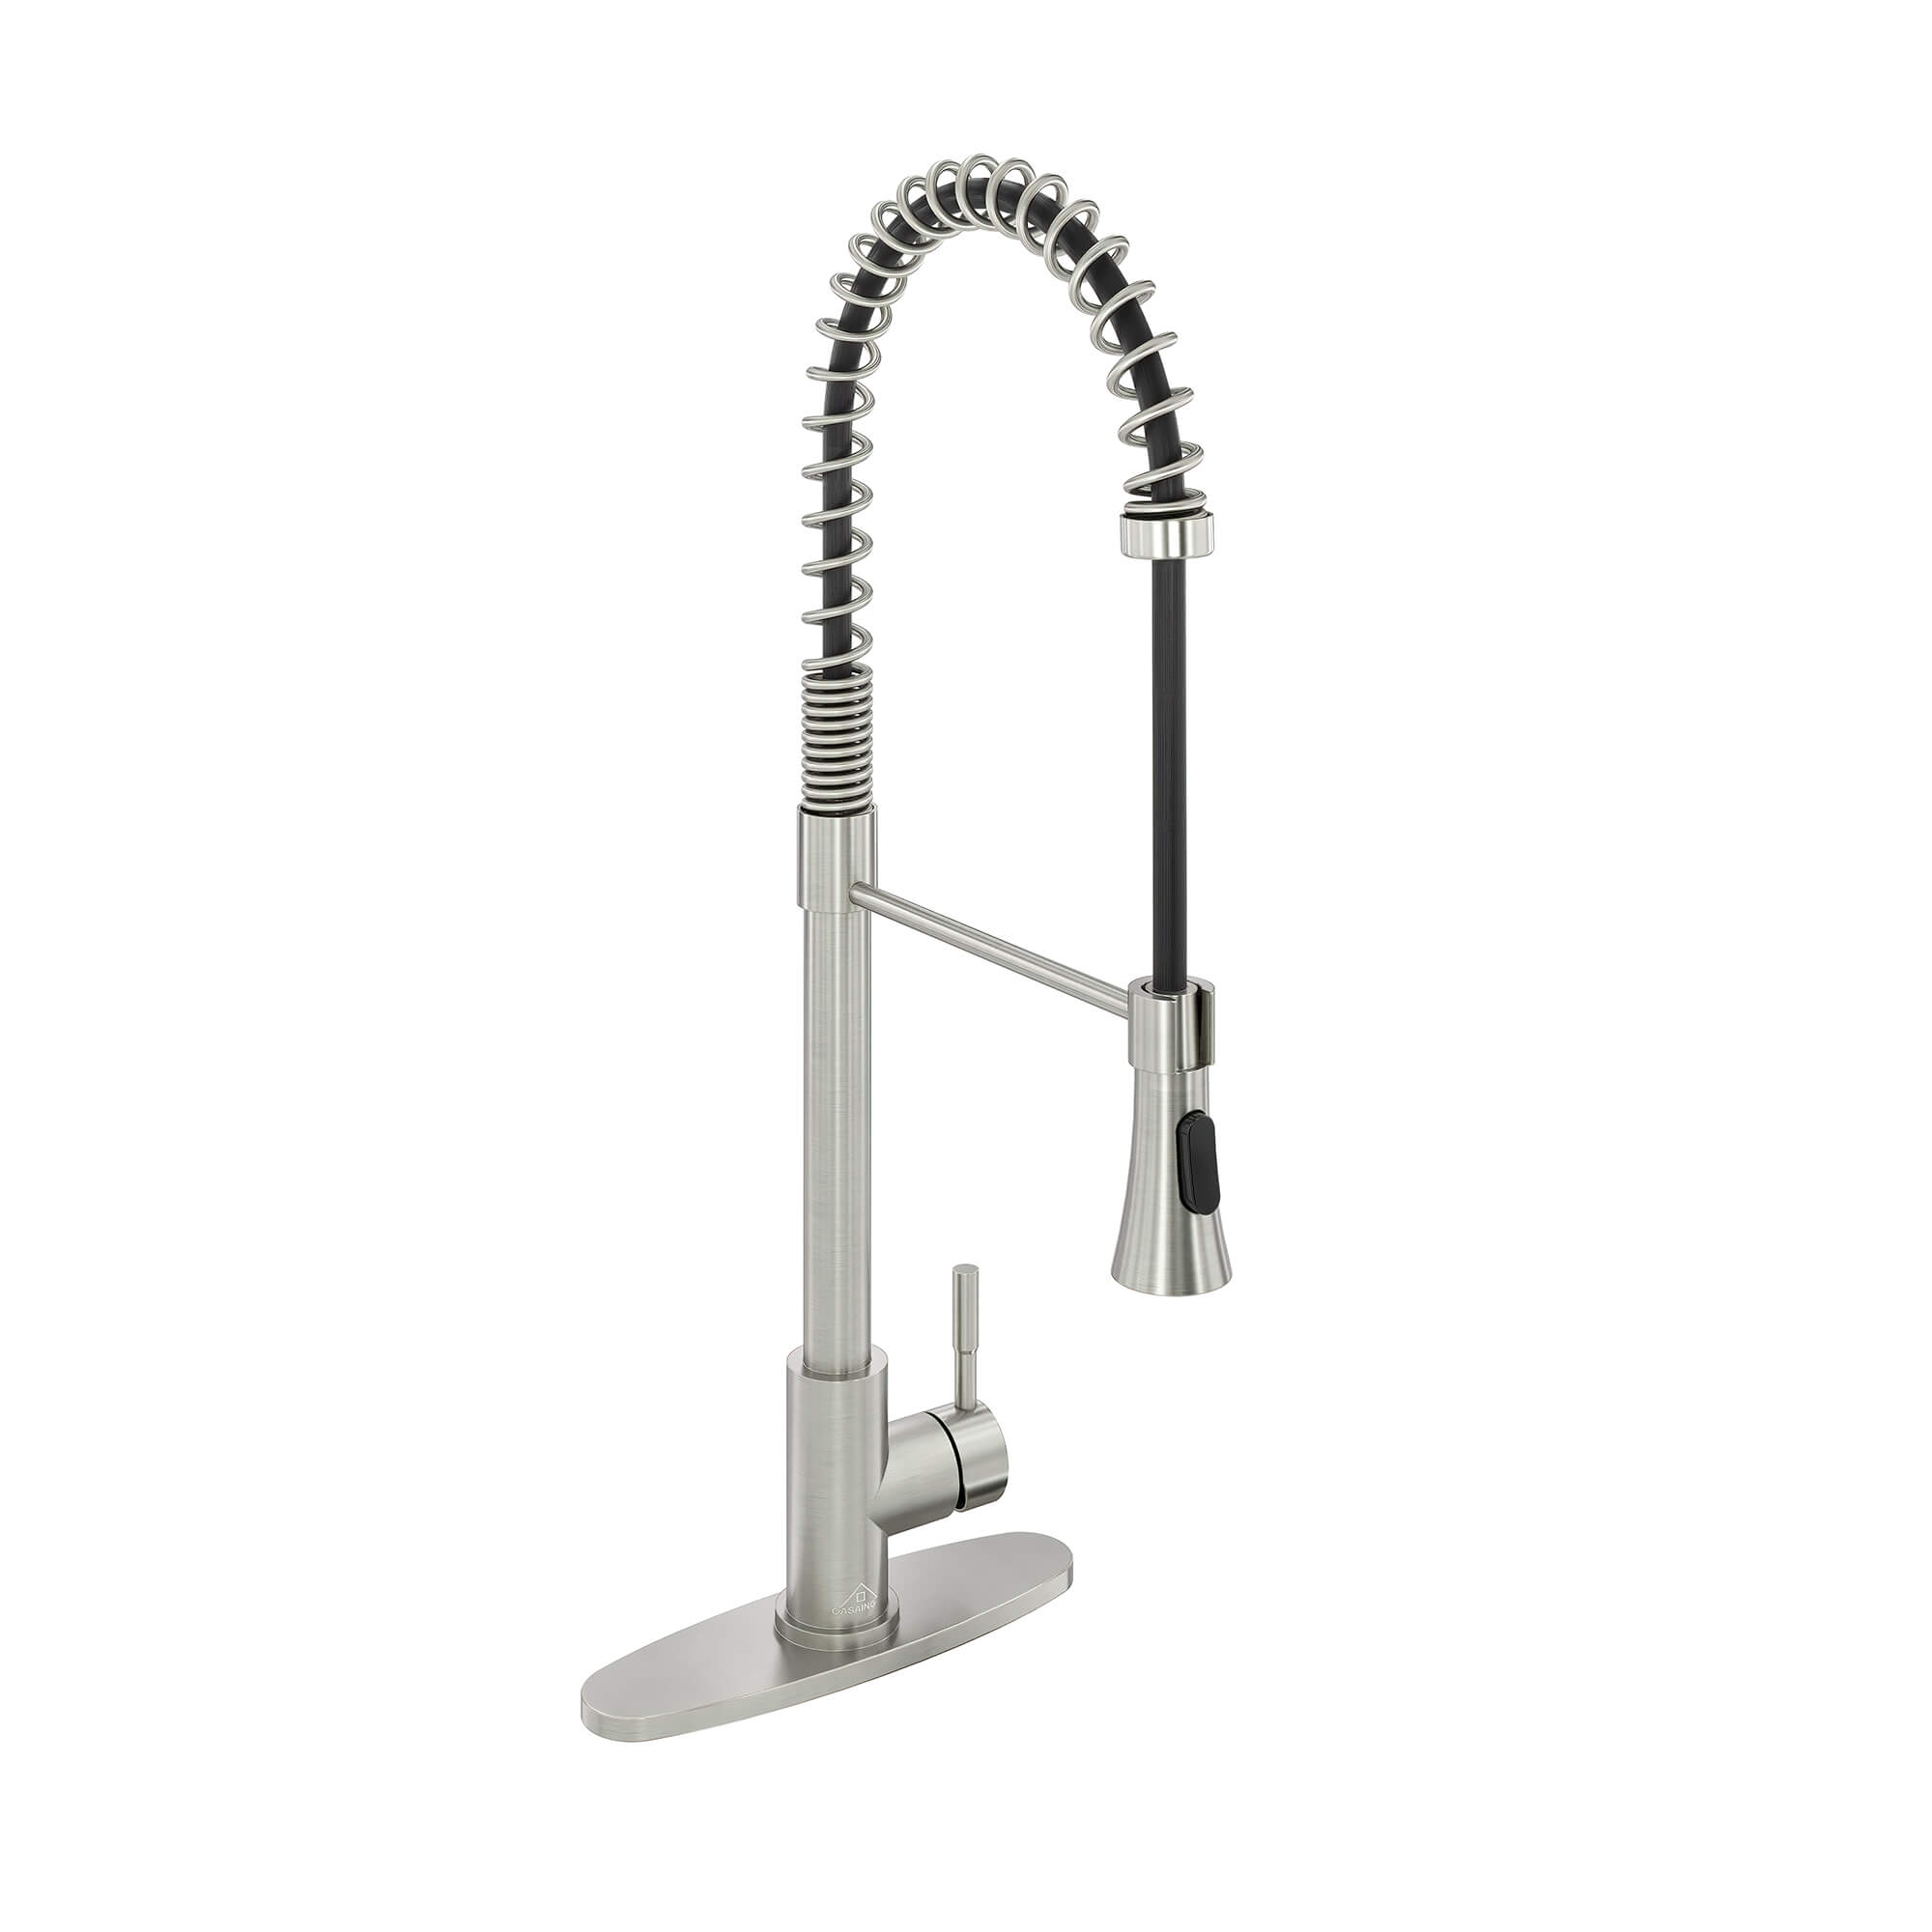 CASAINC 1.8GPM Modern Spring Pull Out Kitchen Faucet in Brushed Nickel and More-CASAINC